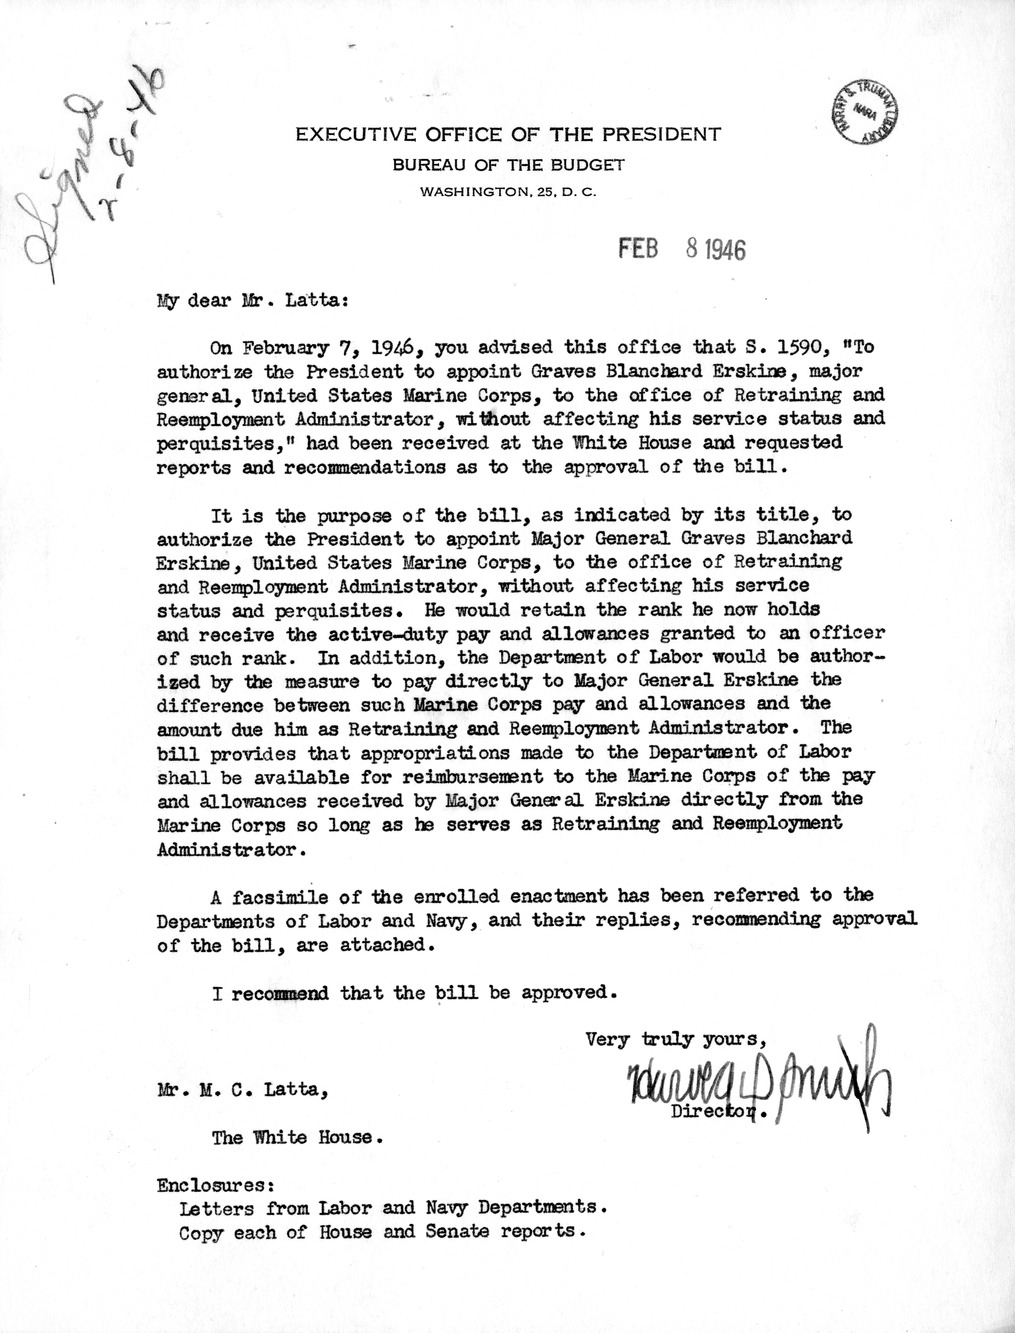 Memorandum from Harold D. Smith to M. C. Latta, S. 1590, To Authorize the President to Appoint Graves B. Erskine, Major General, United States Marine Corps, to the Office of Retraining and Reemployment Administrator, Without Affecting His Service Status and Prequisites, with Attachments